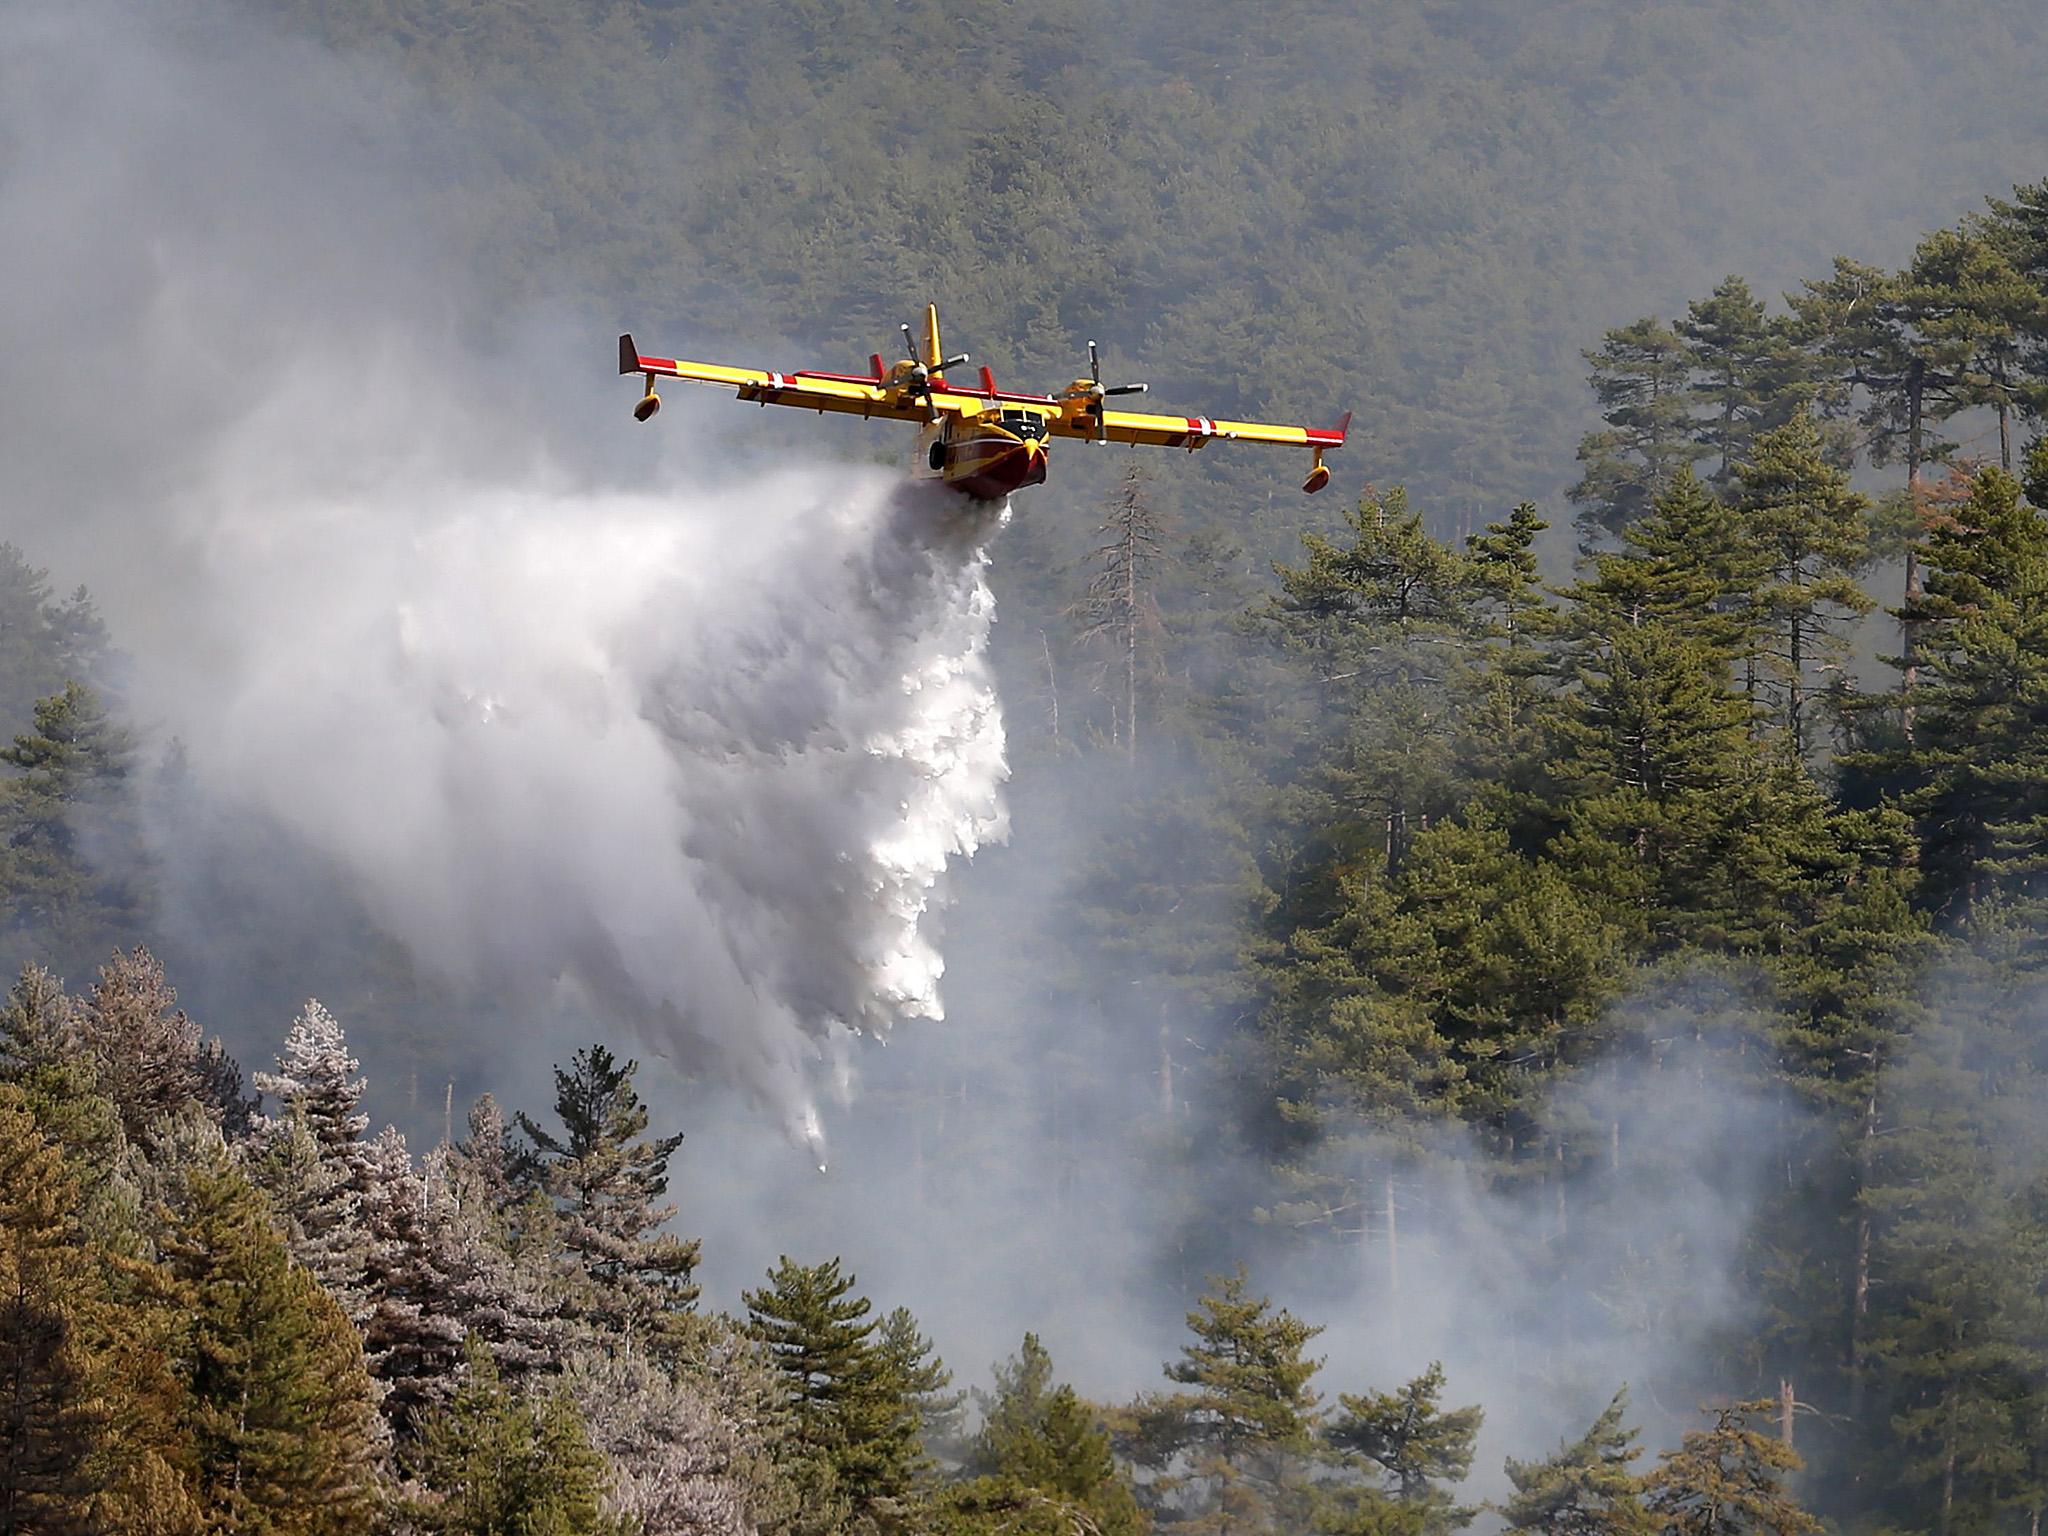 A firefighting plane drops water on a fire at Palneca on the French Mediterranean island of Corsica